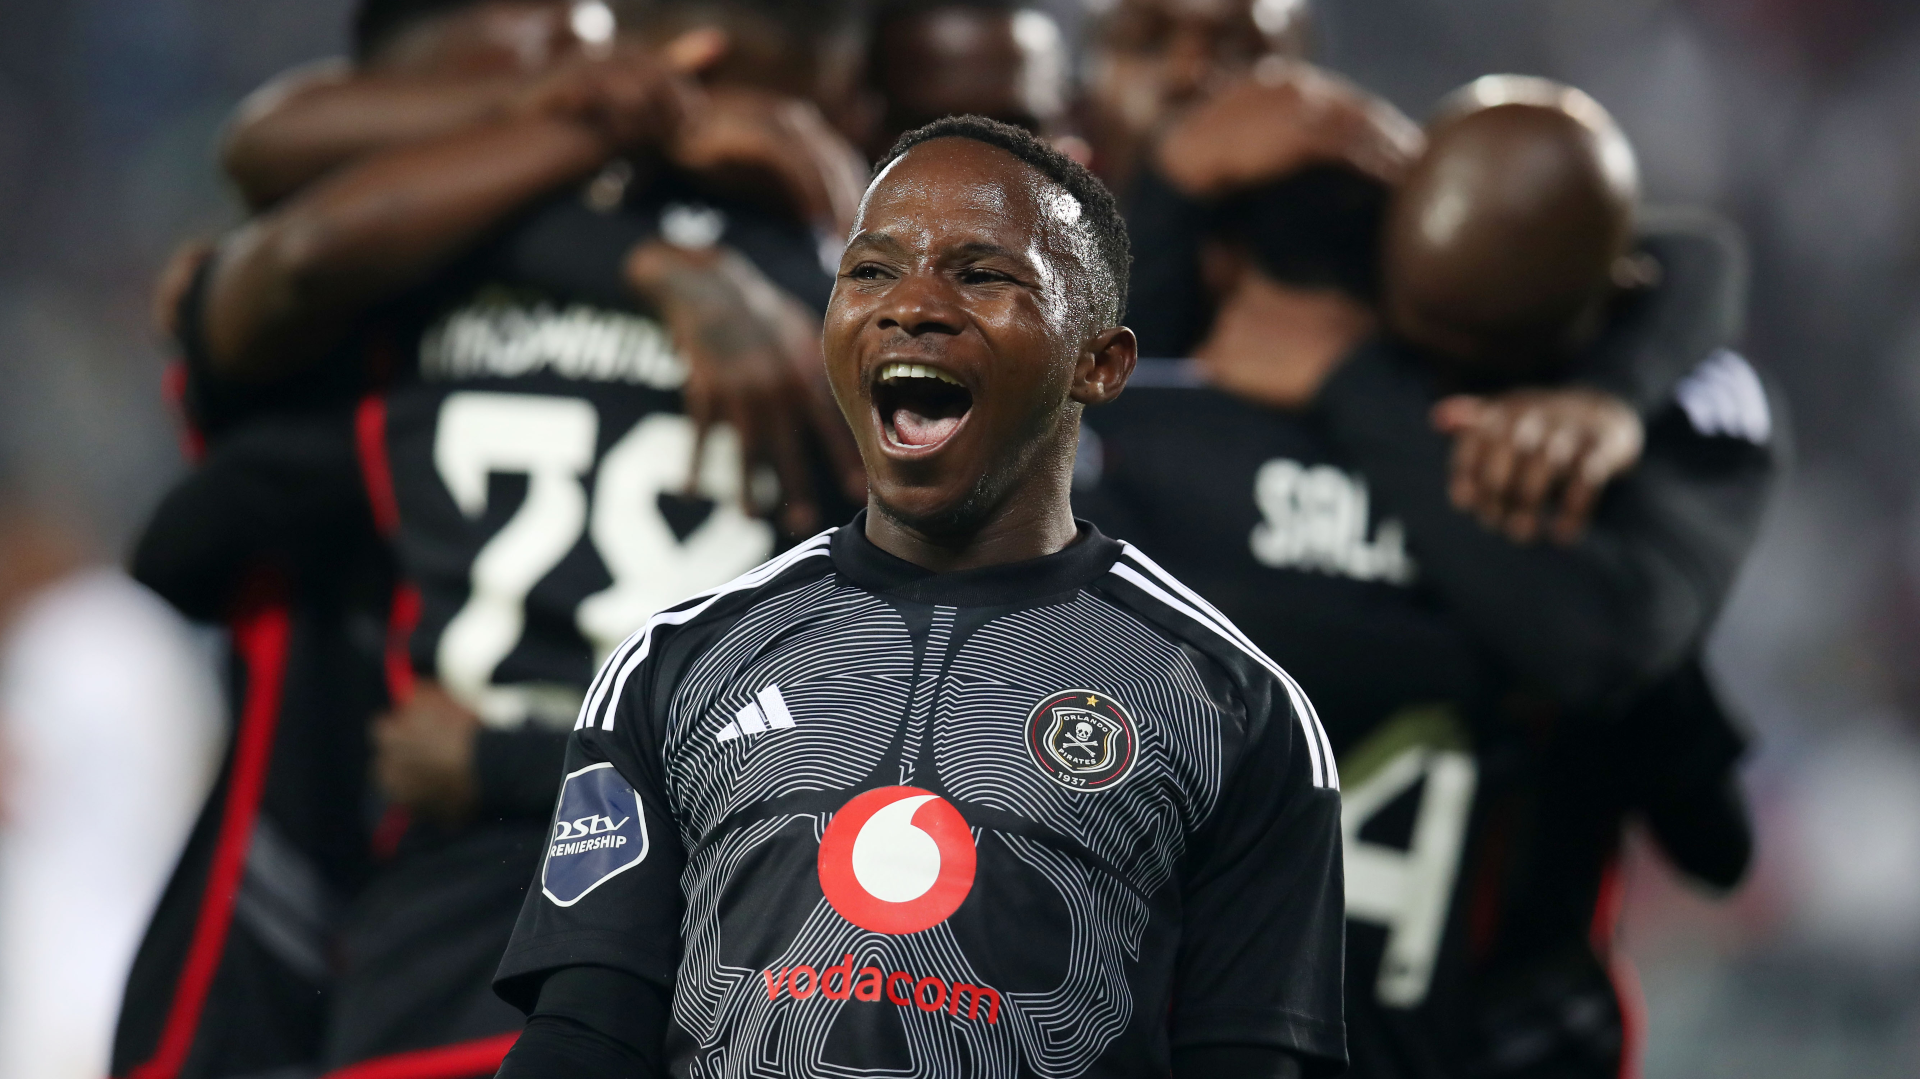 POLL  What do you think of Orlando Pirates' new kit designed by Thebe  Magugu?